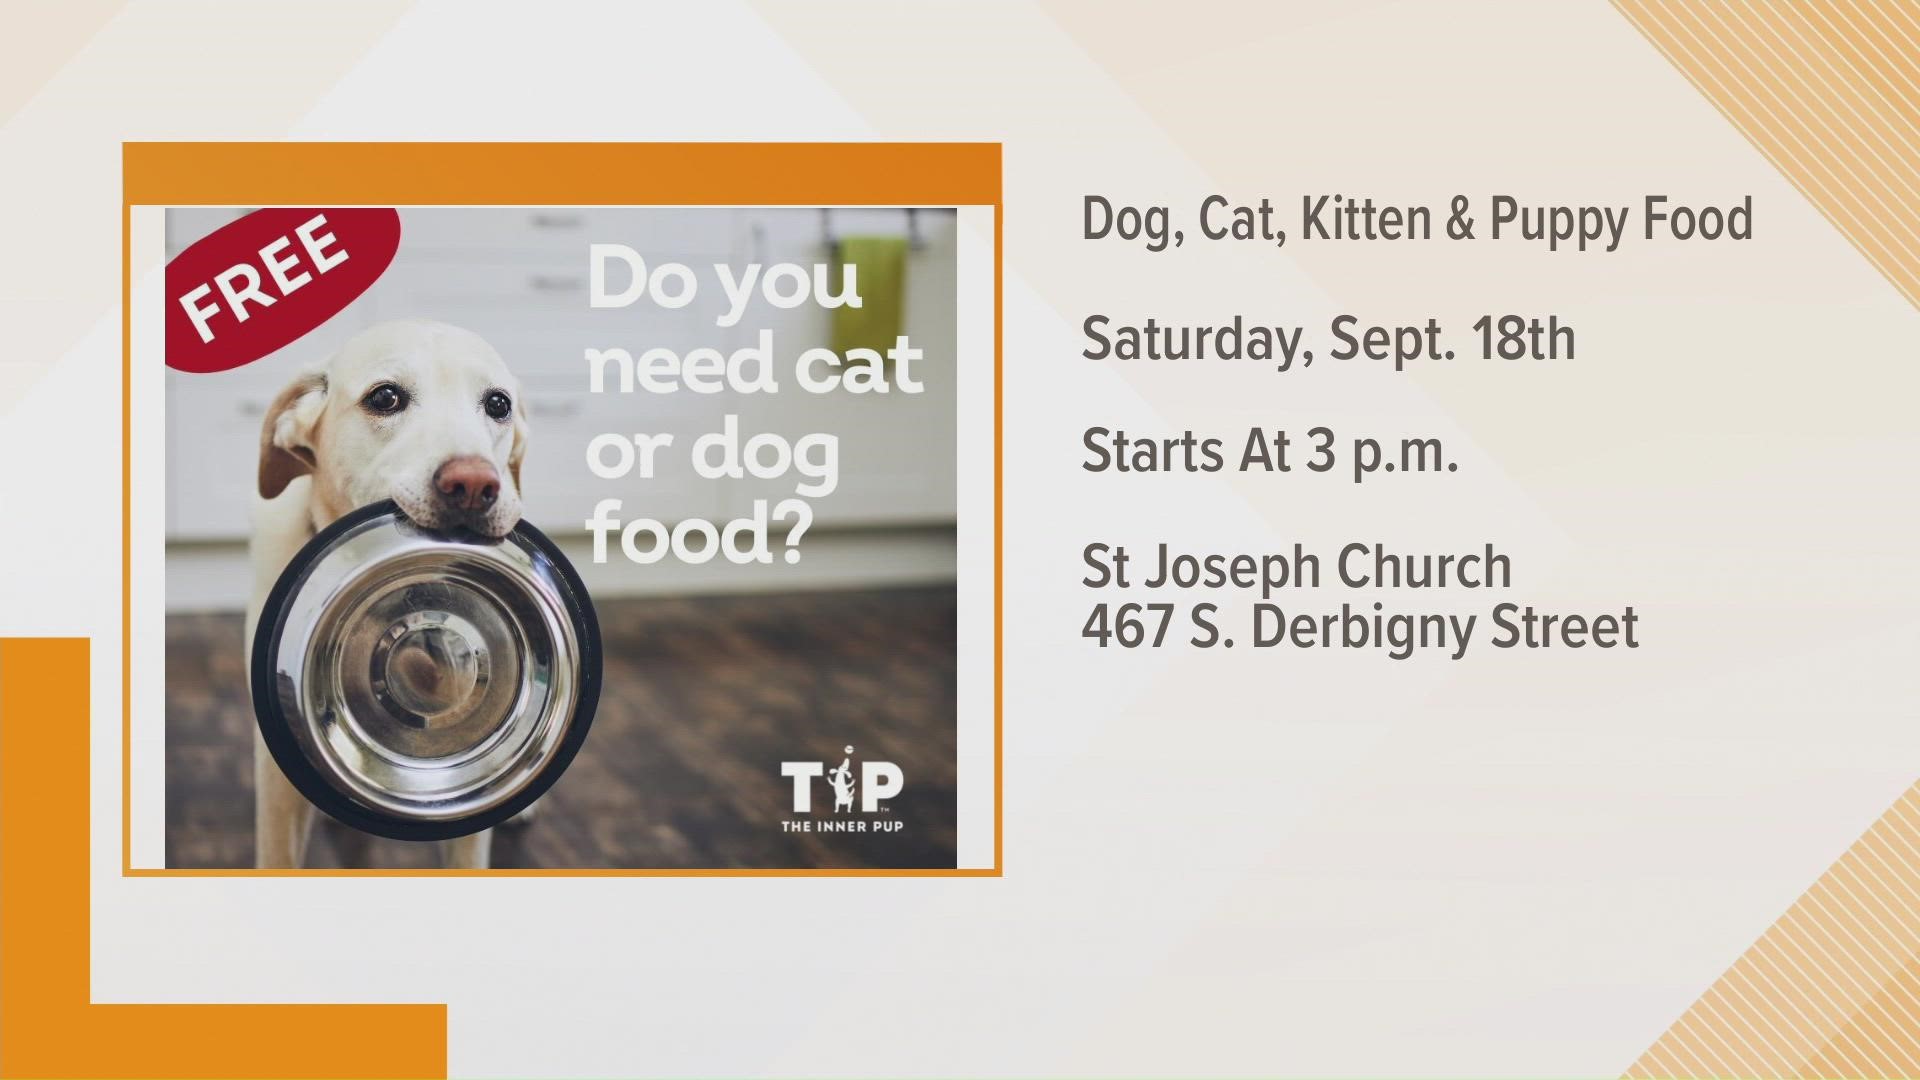 The Inner Pup is giving away free heartworm medications and pet food at St. Joseph Church 467 S. Derbigny St Sunday at 3 p.m.